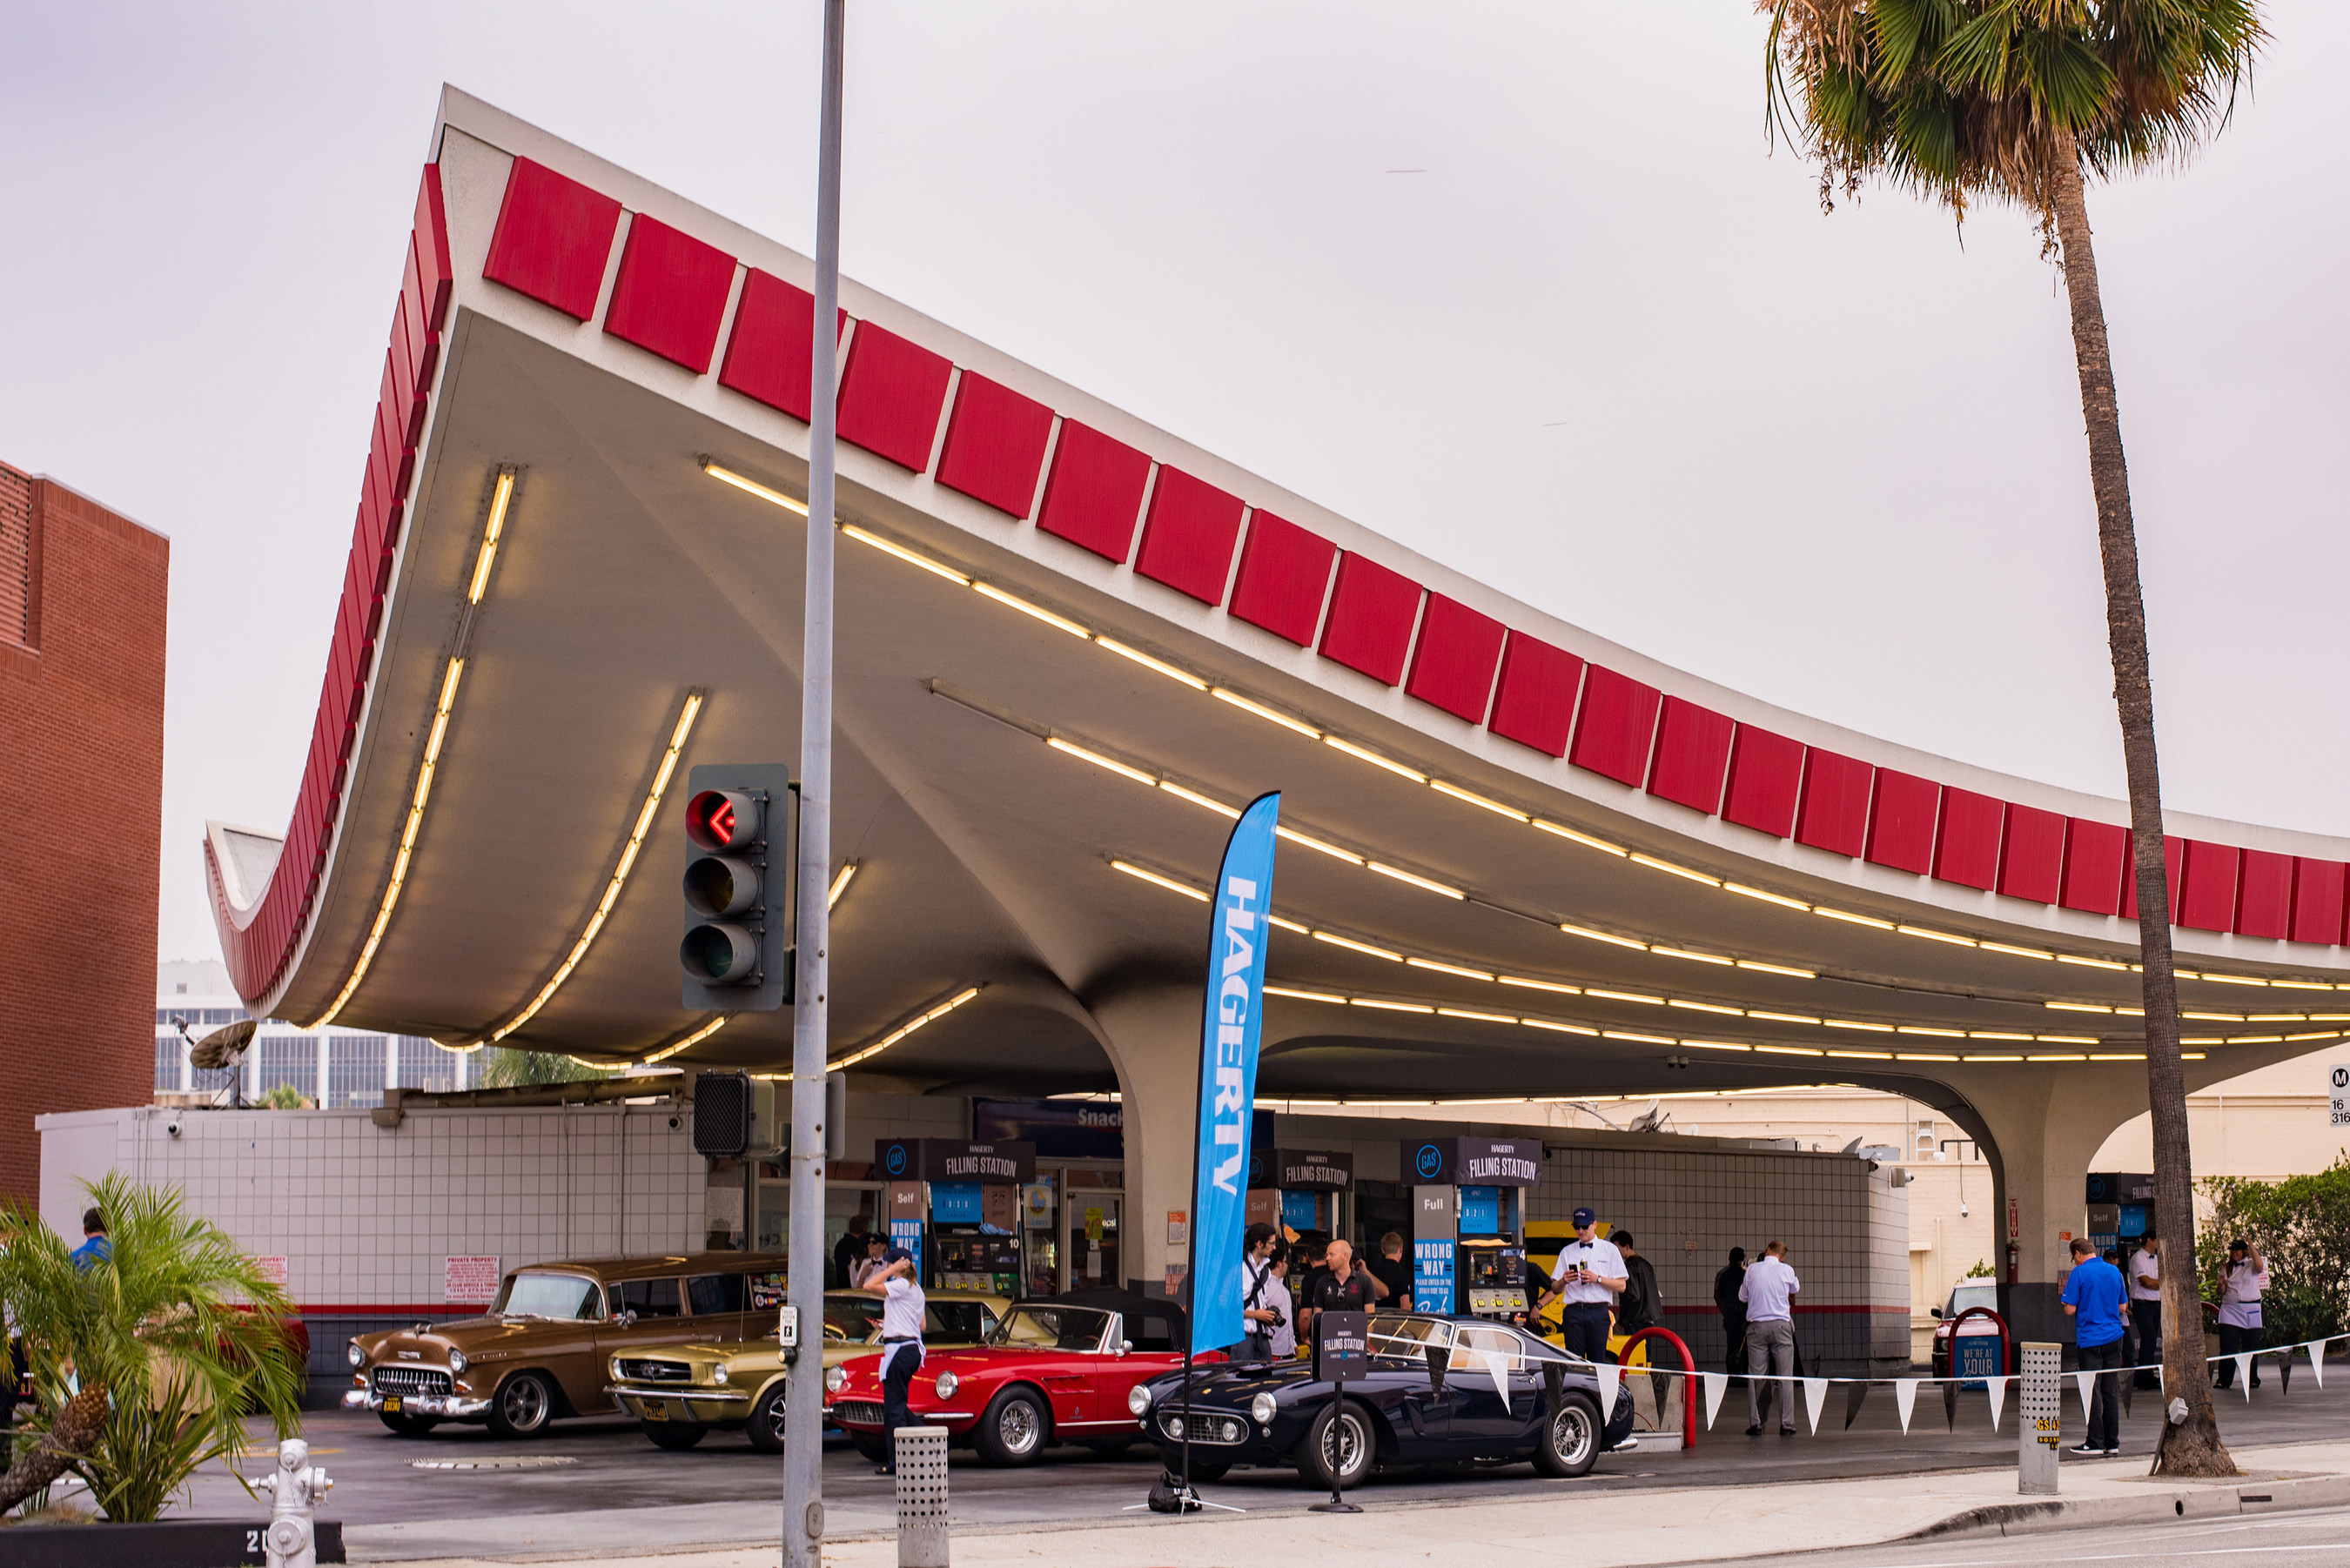 Hagerty vintage gas station event celebrating National Collector Car Appreciation Day at the iconic 76 Gas Station in Beverly Hills, CA.